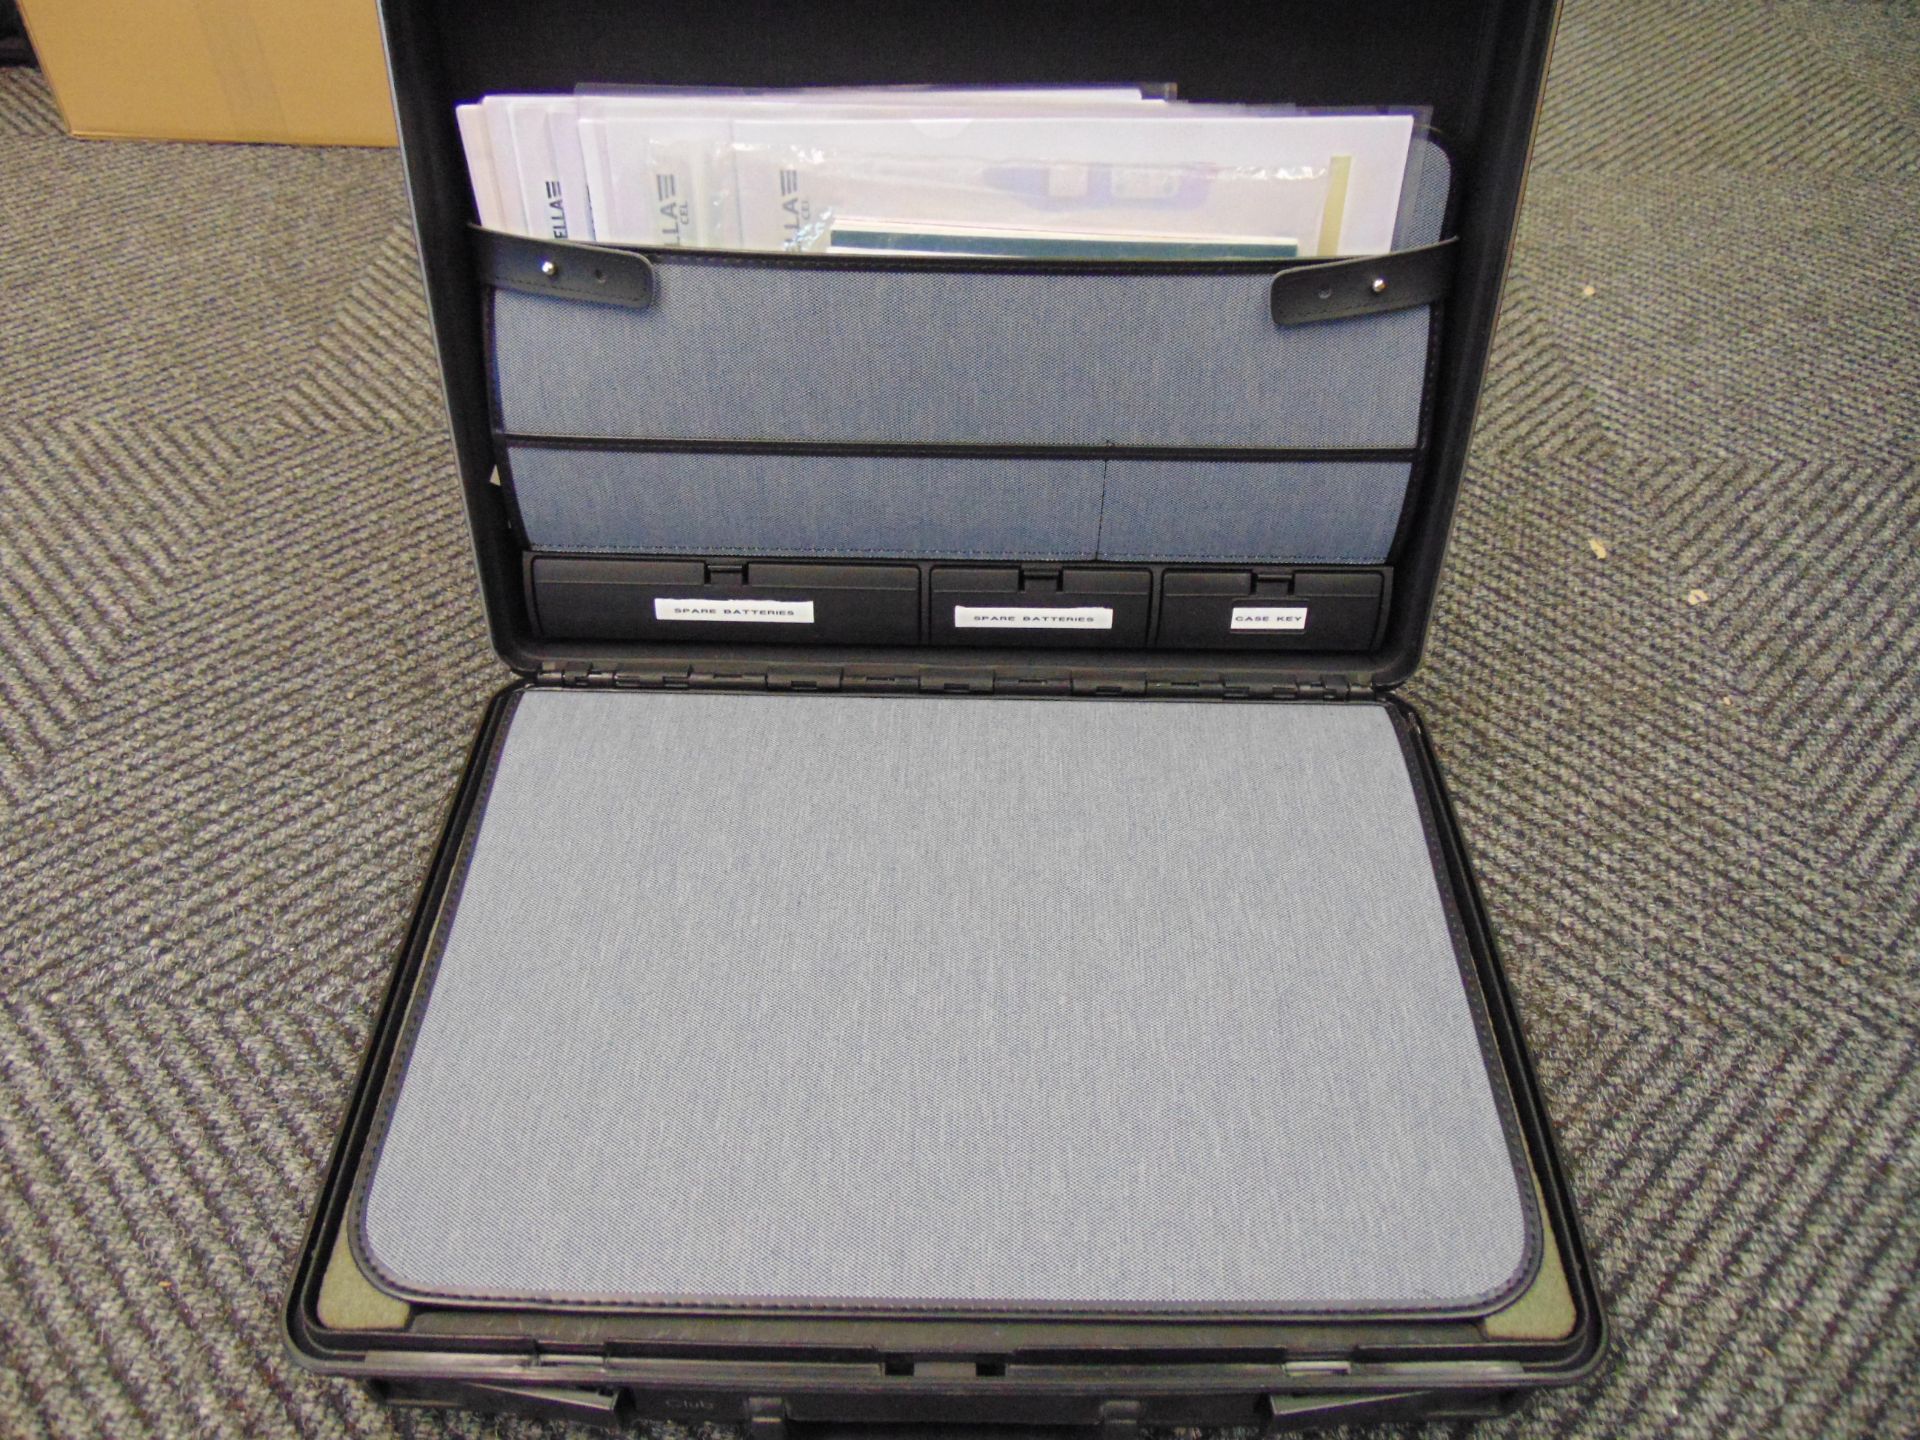 Casella Sound Level Meter Kit CEL-450 with CEL-110/1 Calibrator C/W Carry Case - Image 5 of 6